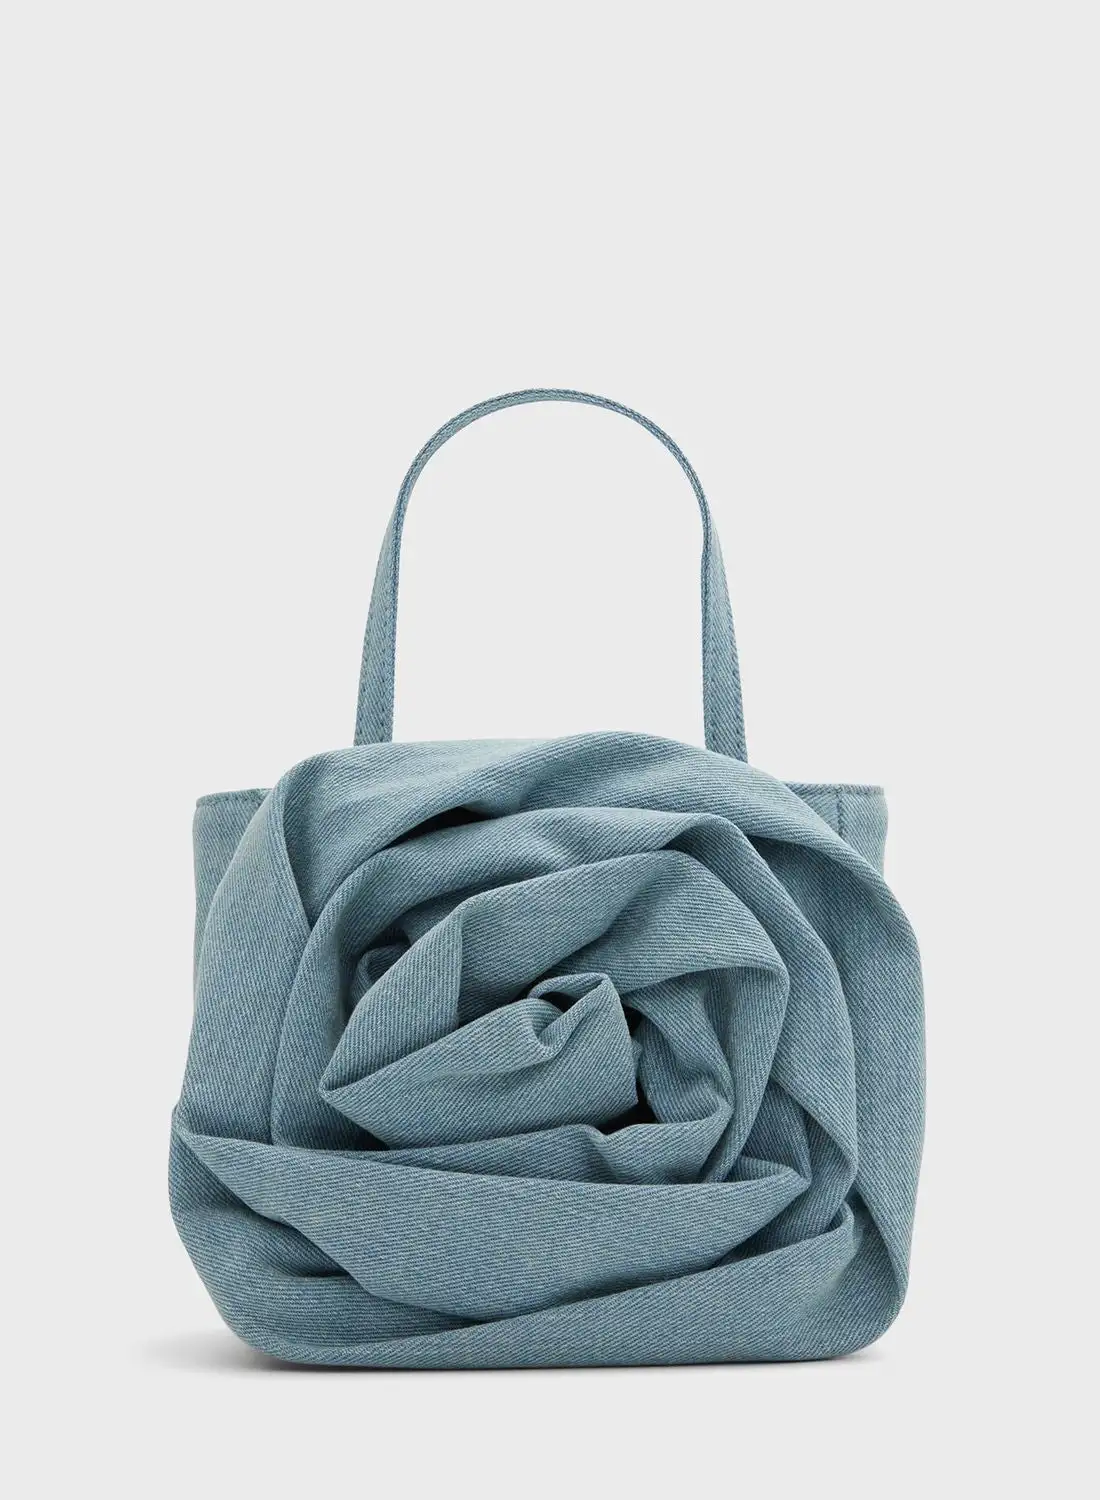 CALL IT SPRING Petaly Top Handle Tote